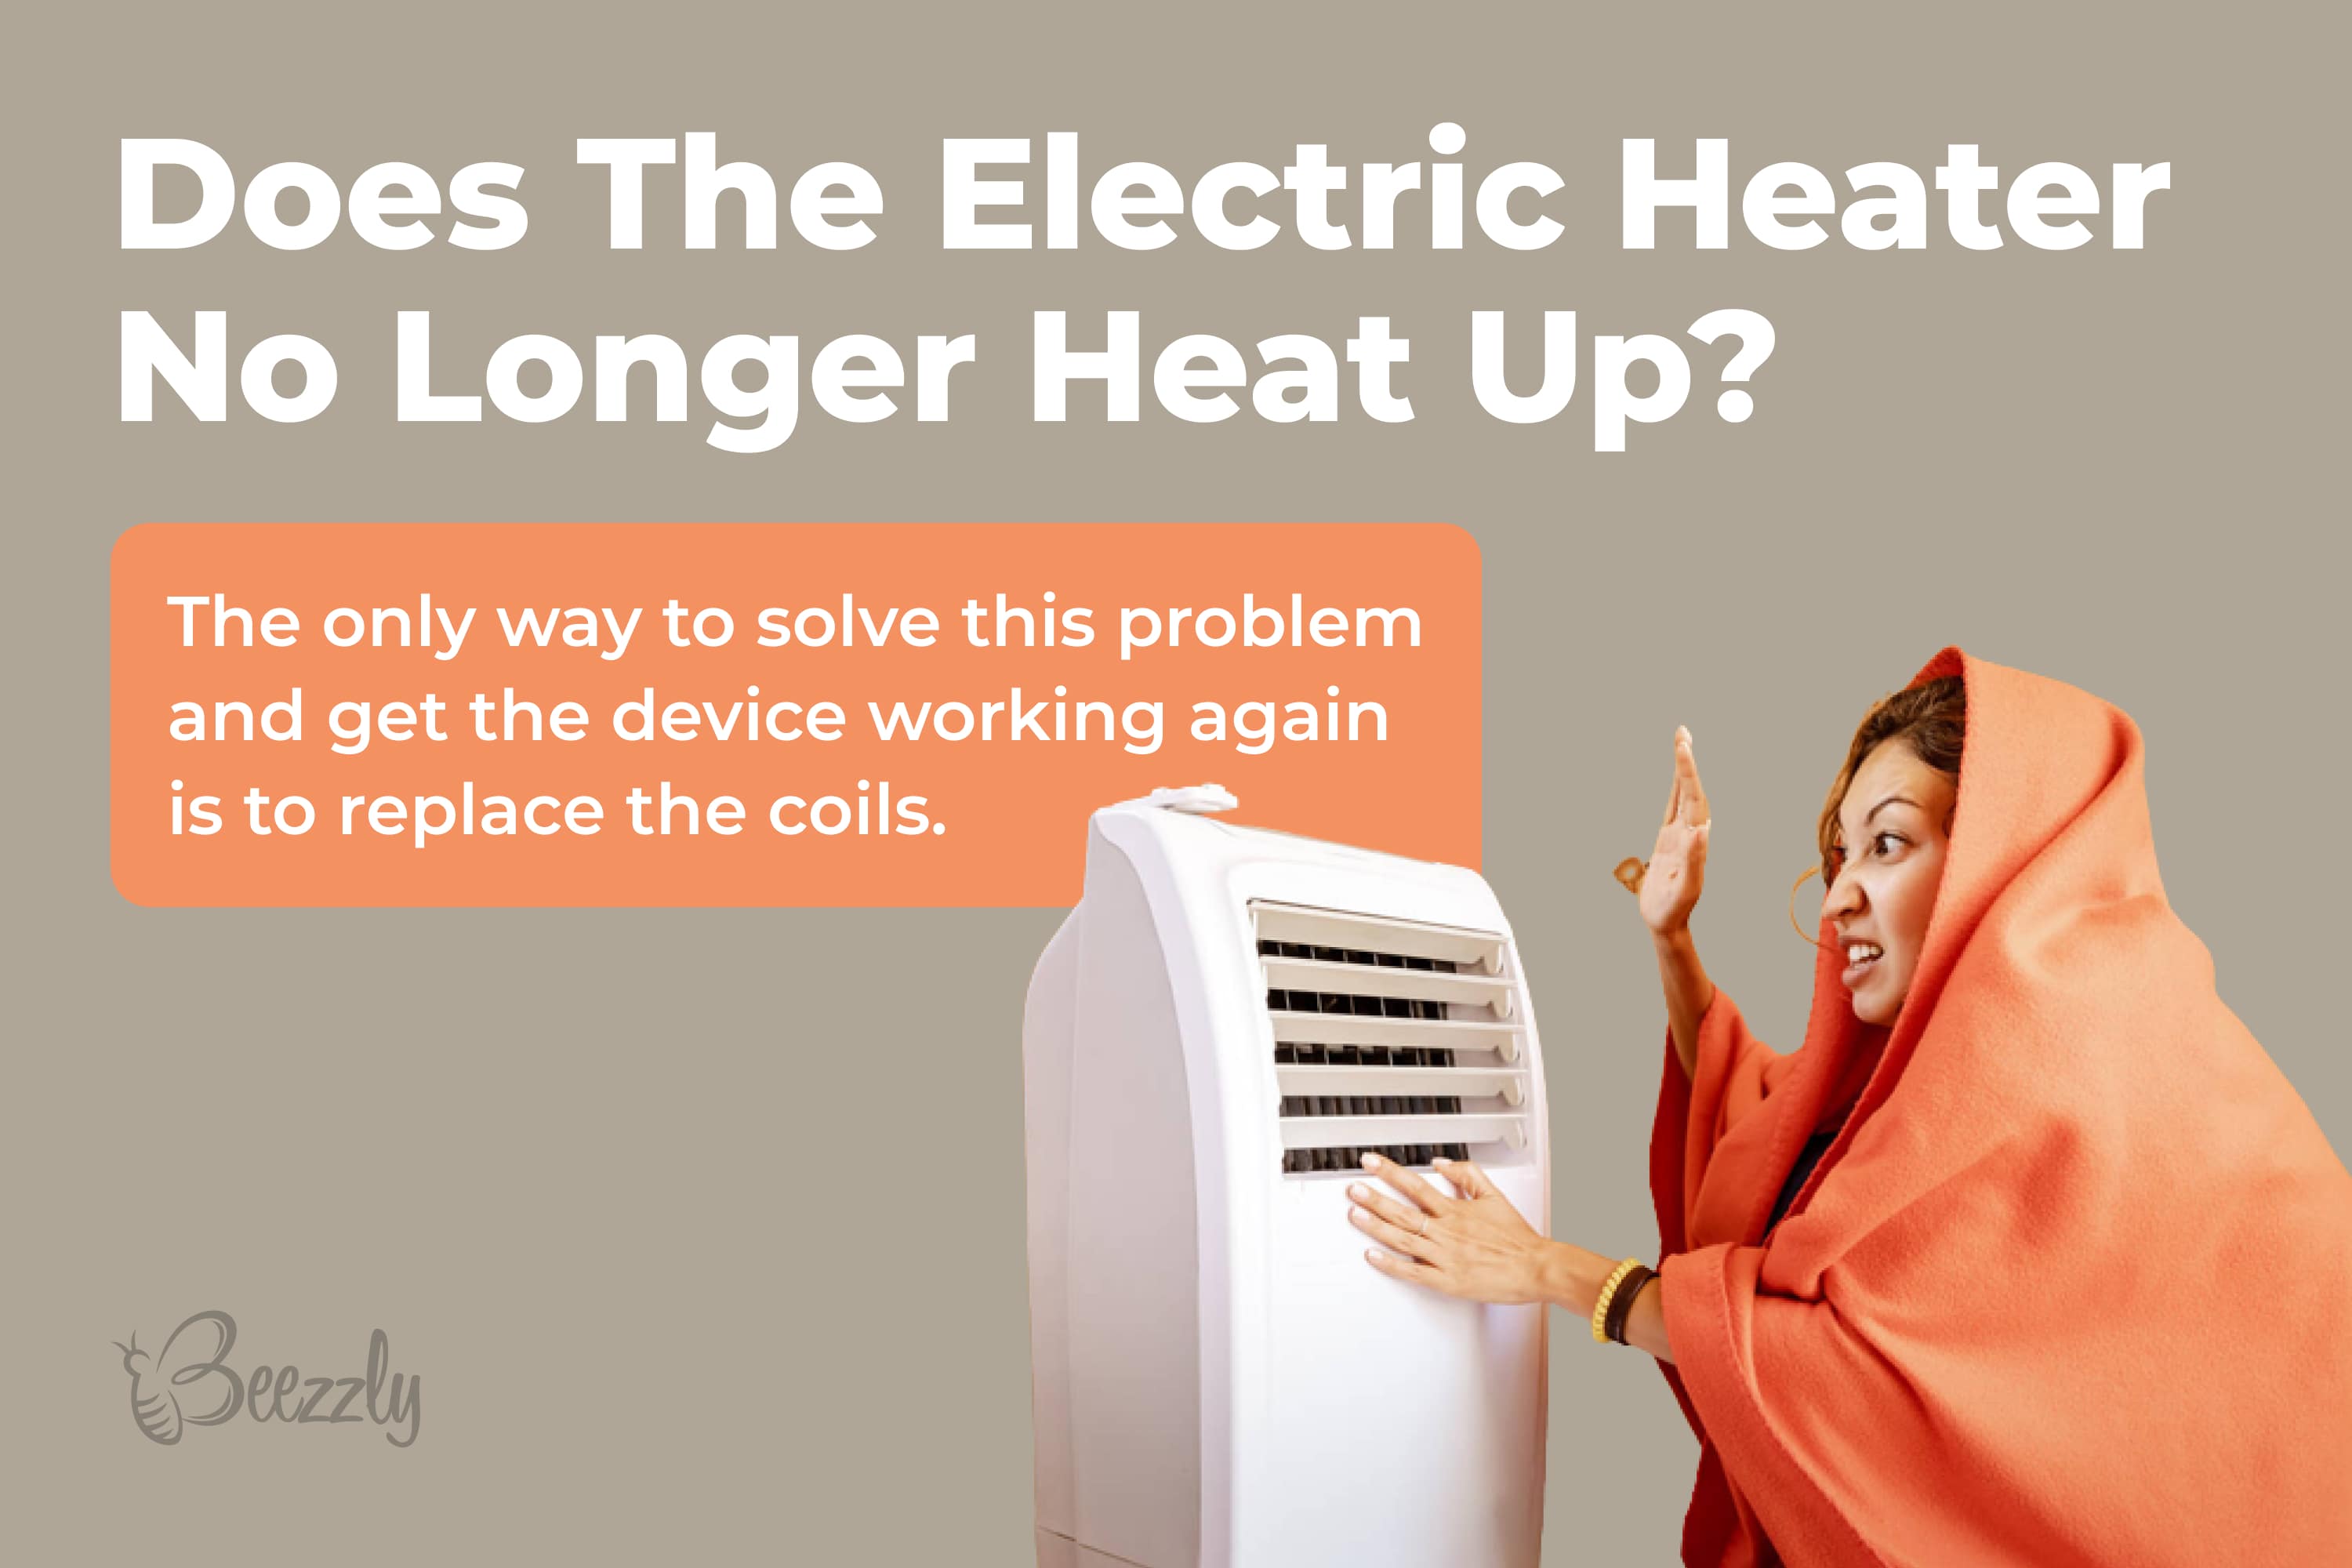 Does the electric heater no longer heat up